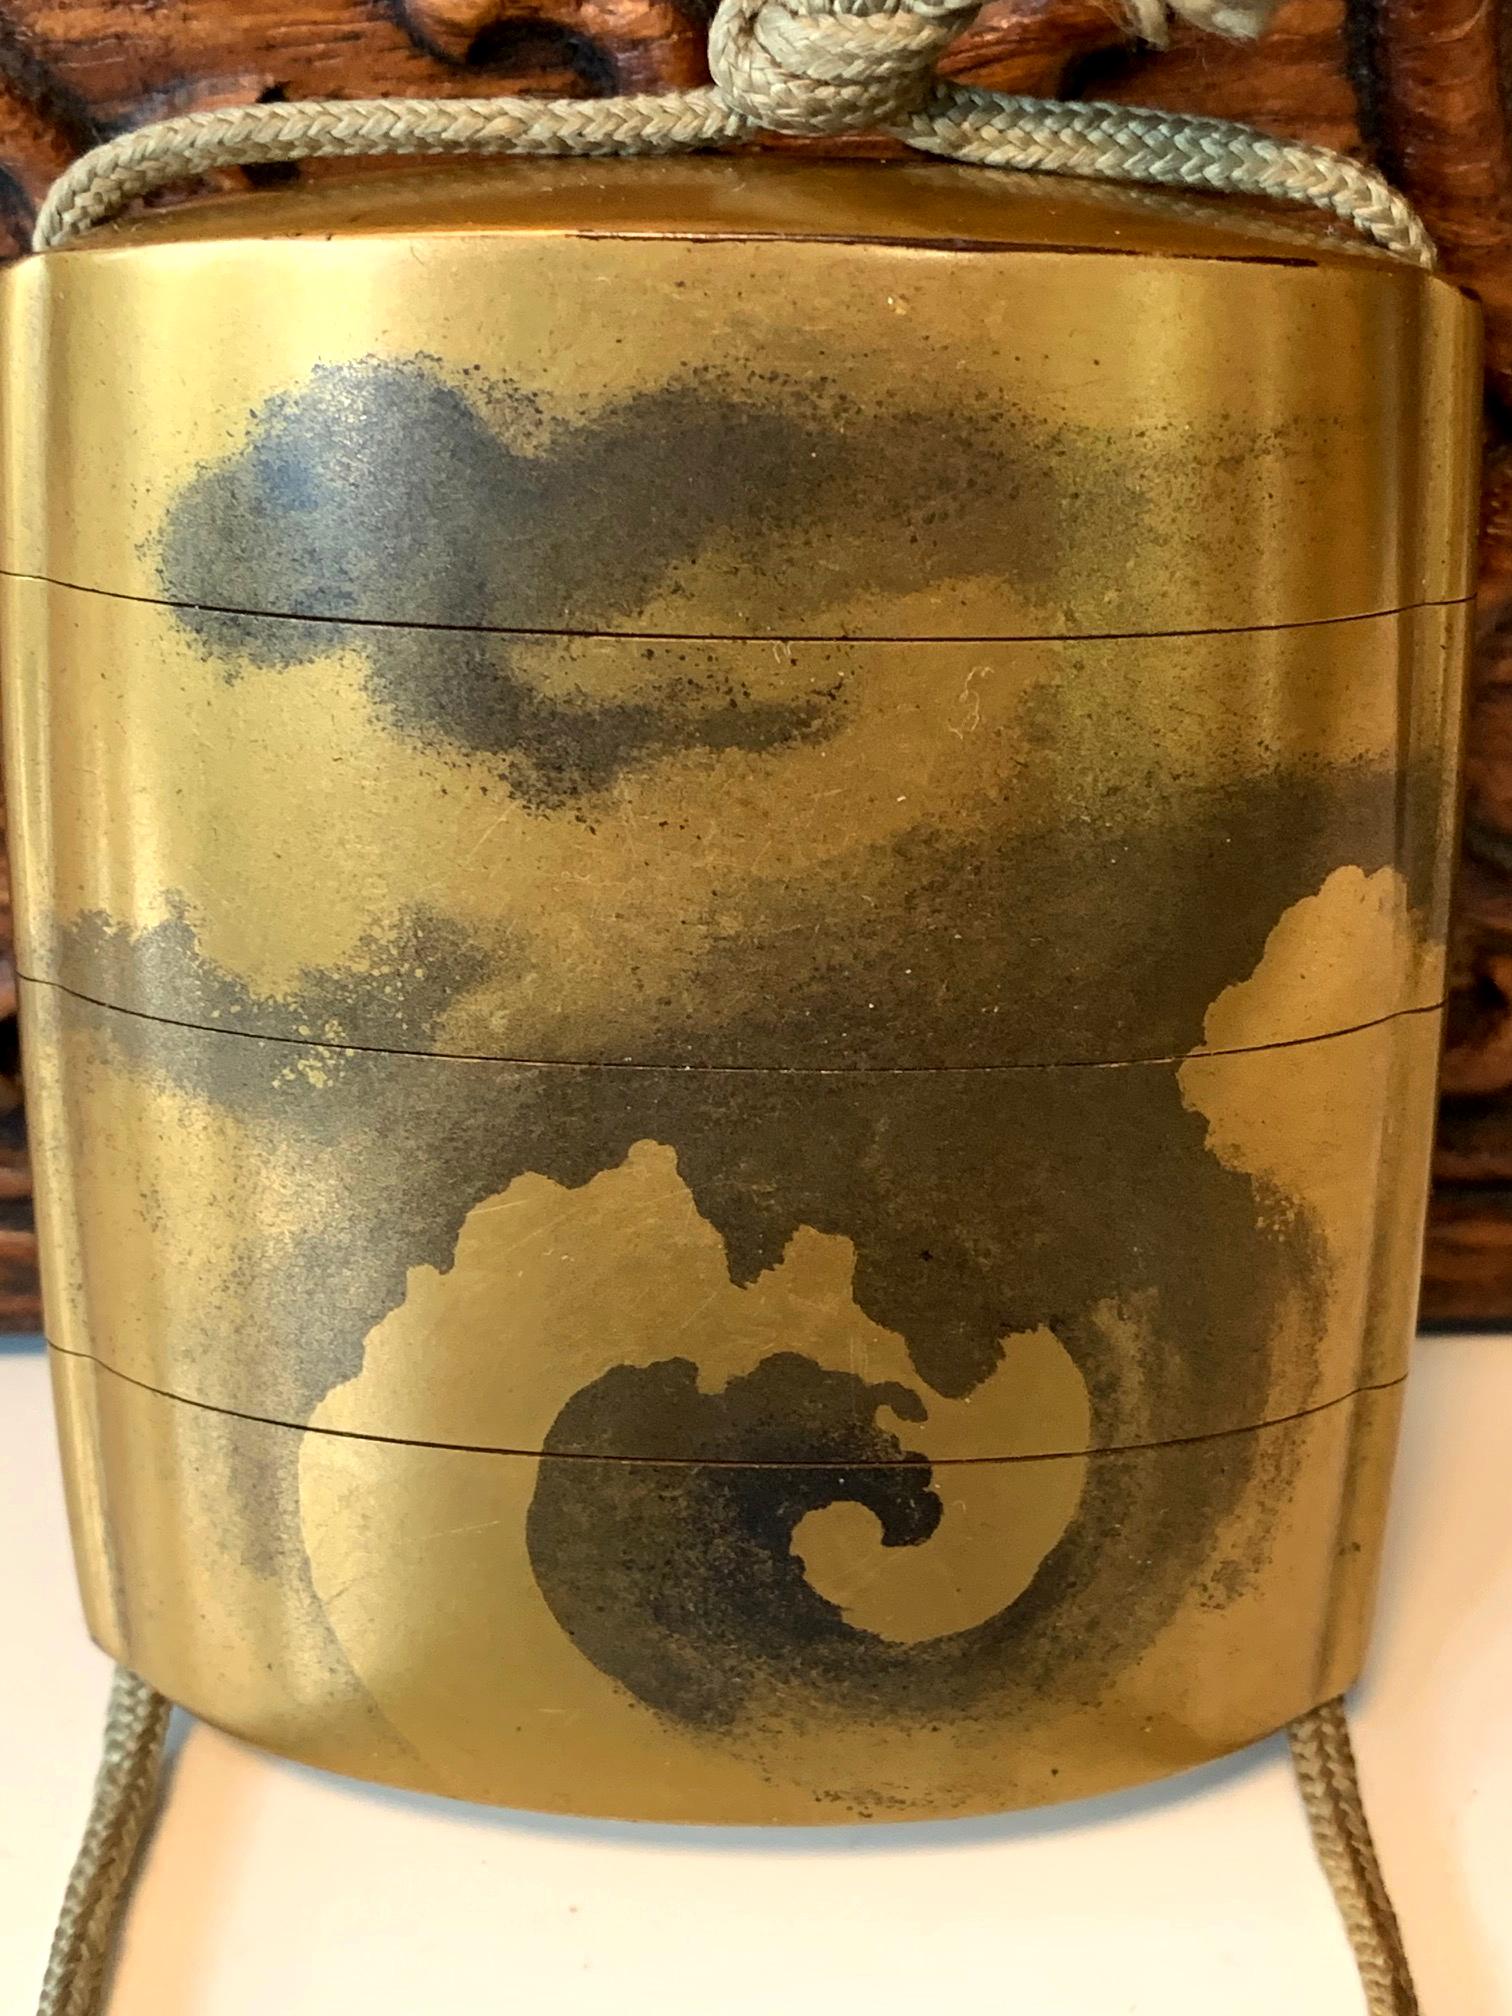 A three-case lacquered Inro by Yamada Family circa 18th-19th century Edo period. The inro with slight rounded form is of Kano style and vividly depicts a dragon slithering among the ink clouds on a gold background. Sumi-e togidashi (ink togidashi)